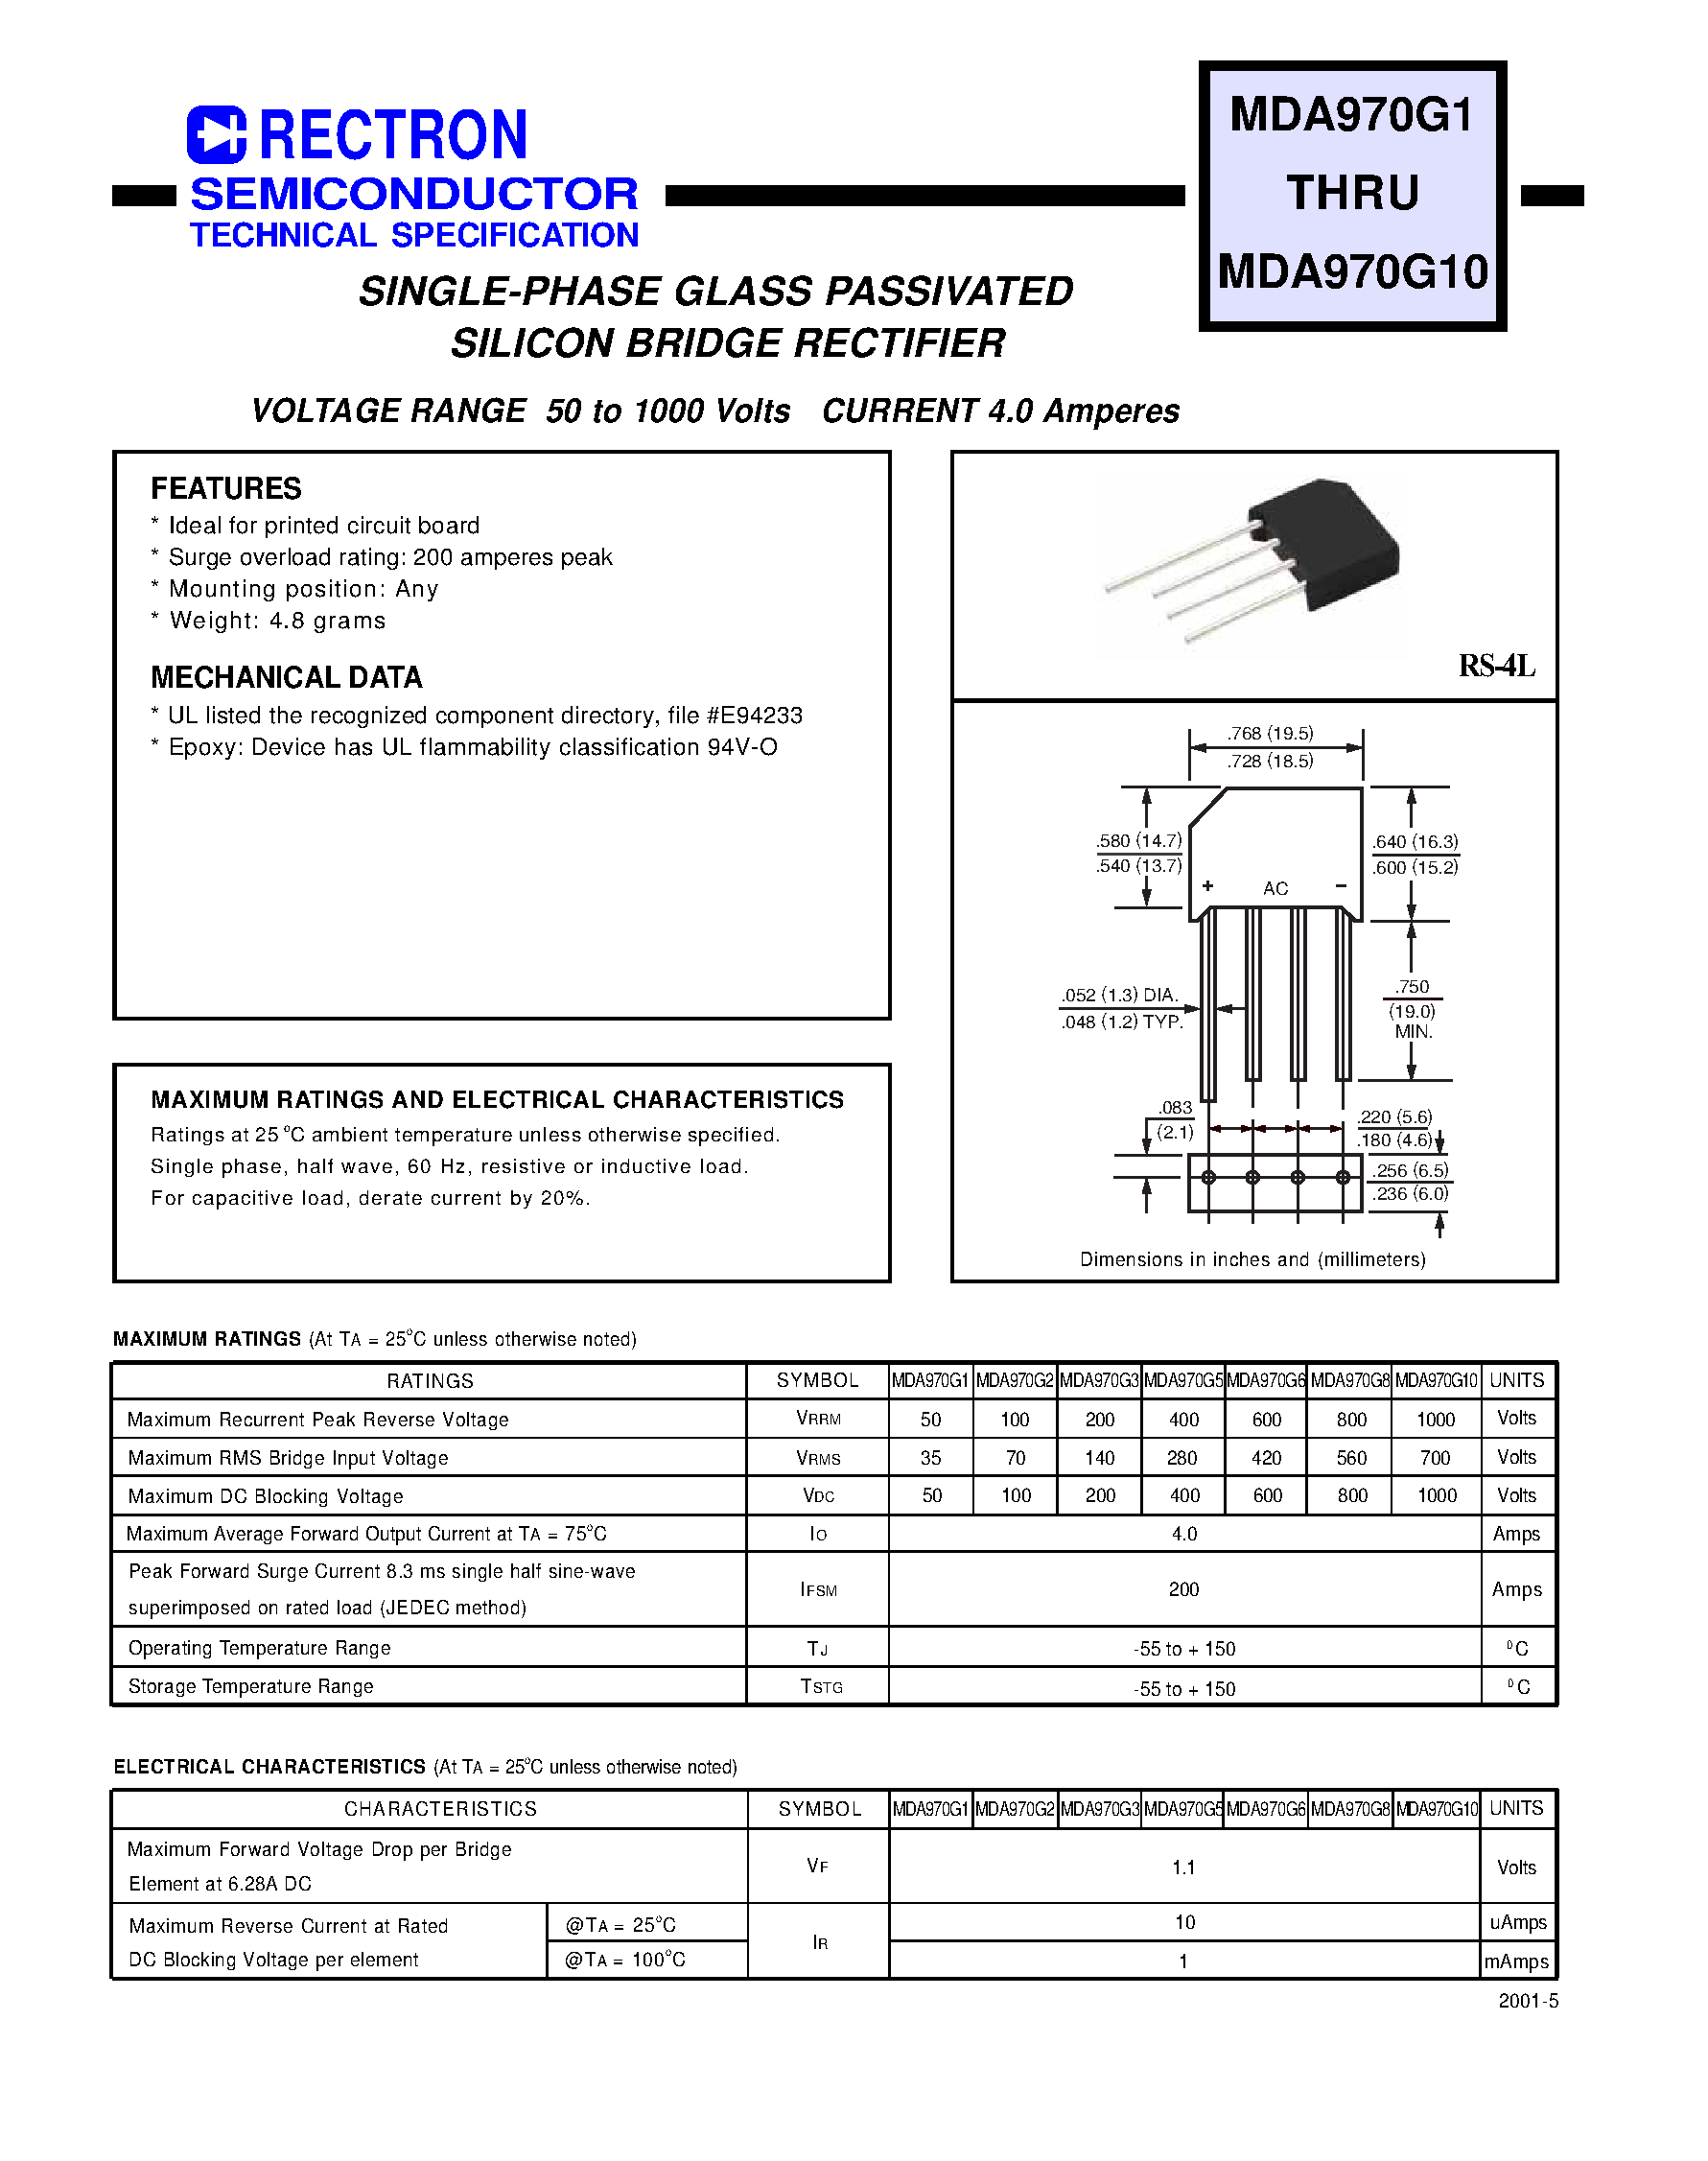 Даташит MDA970G5 - SINGLE-PHASE GLASS PASSIVATED SILICON BRIDGE RECTIFIER (VOLTAGE RANGE 50 to 1000 Volts CURRENT 4.0 Amperes) страница 1